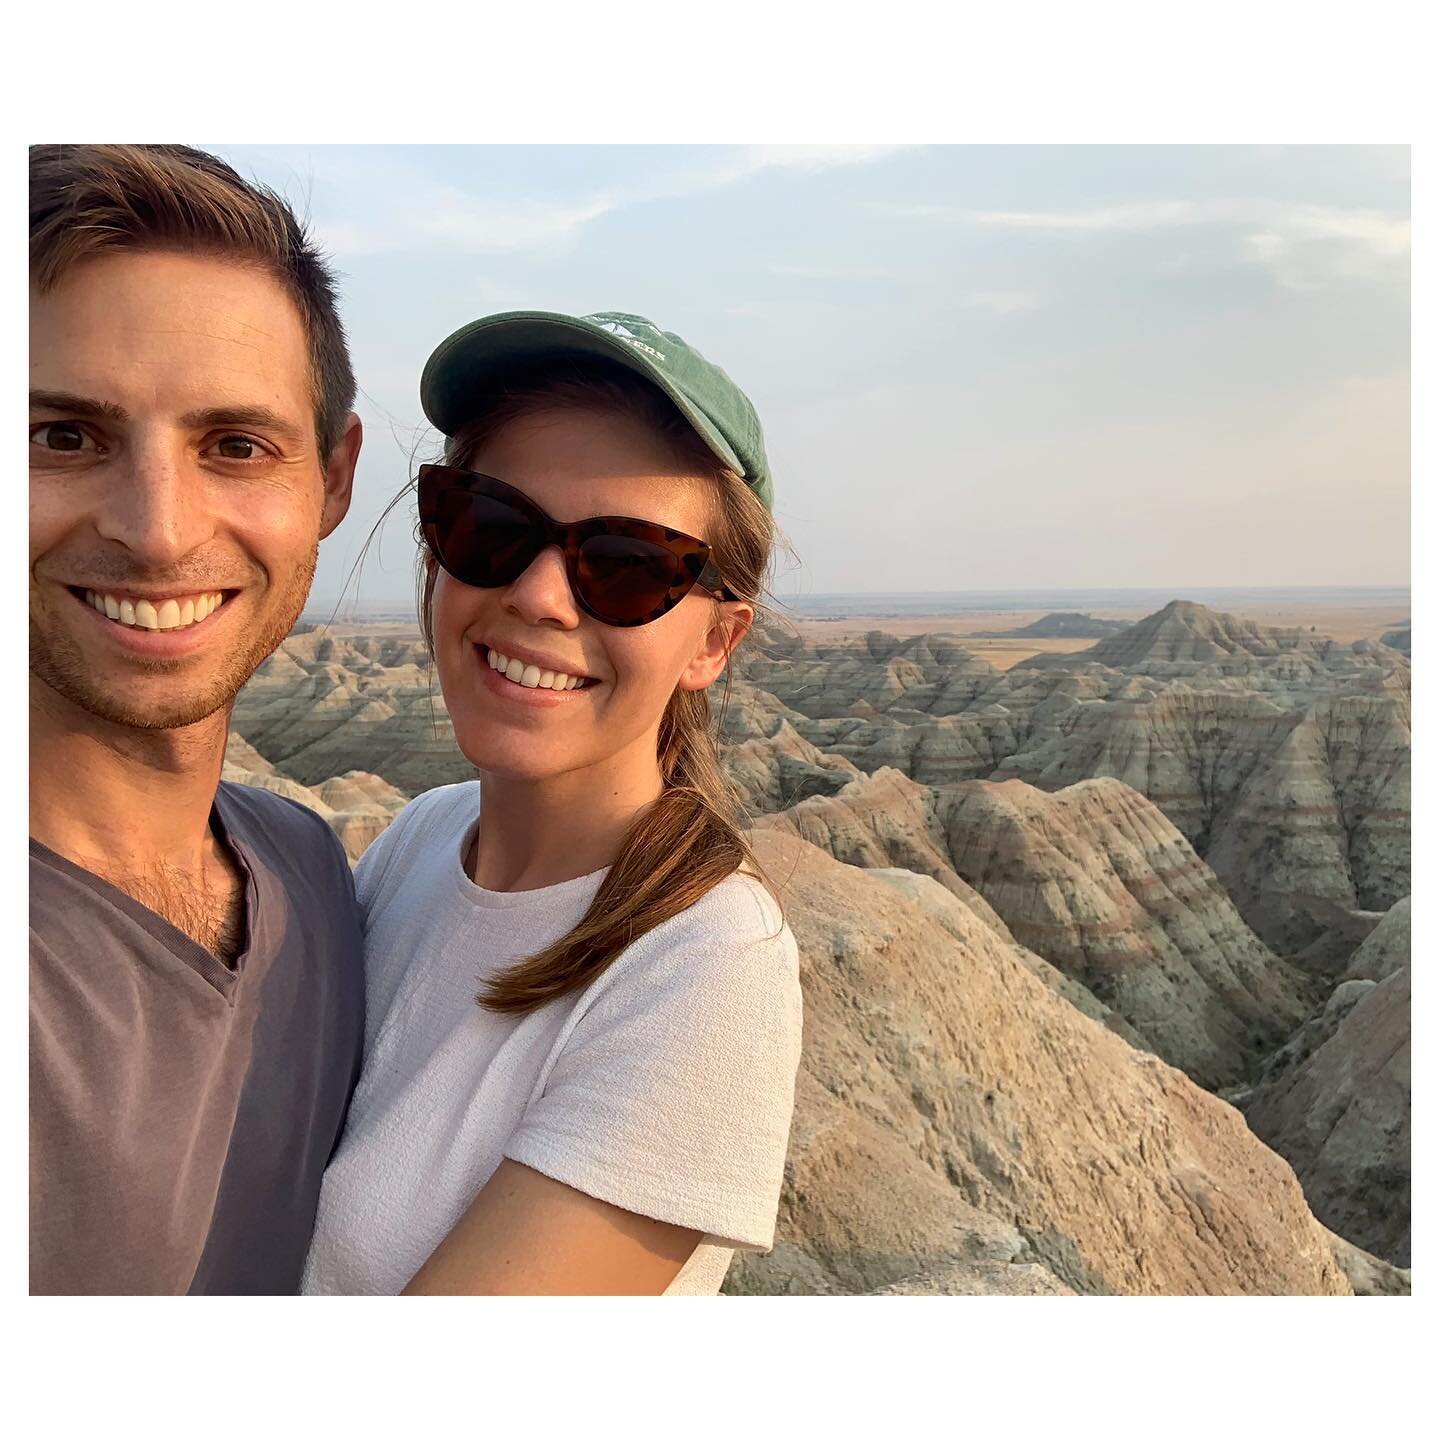 Us + Badlands NP 
(2020 Park #1)
👟
Didn&rsquo;t find a saber tooth cat skull fossil from 30 million years ago, but somebody else did in 2011.